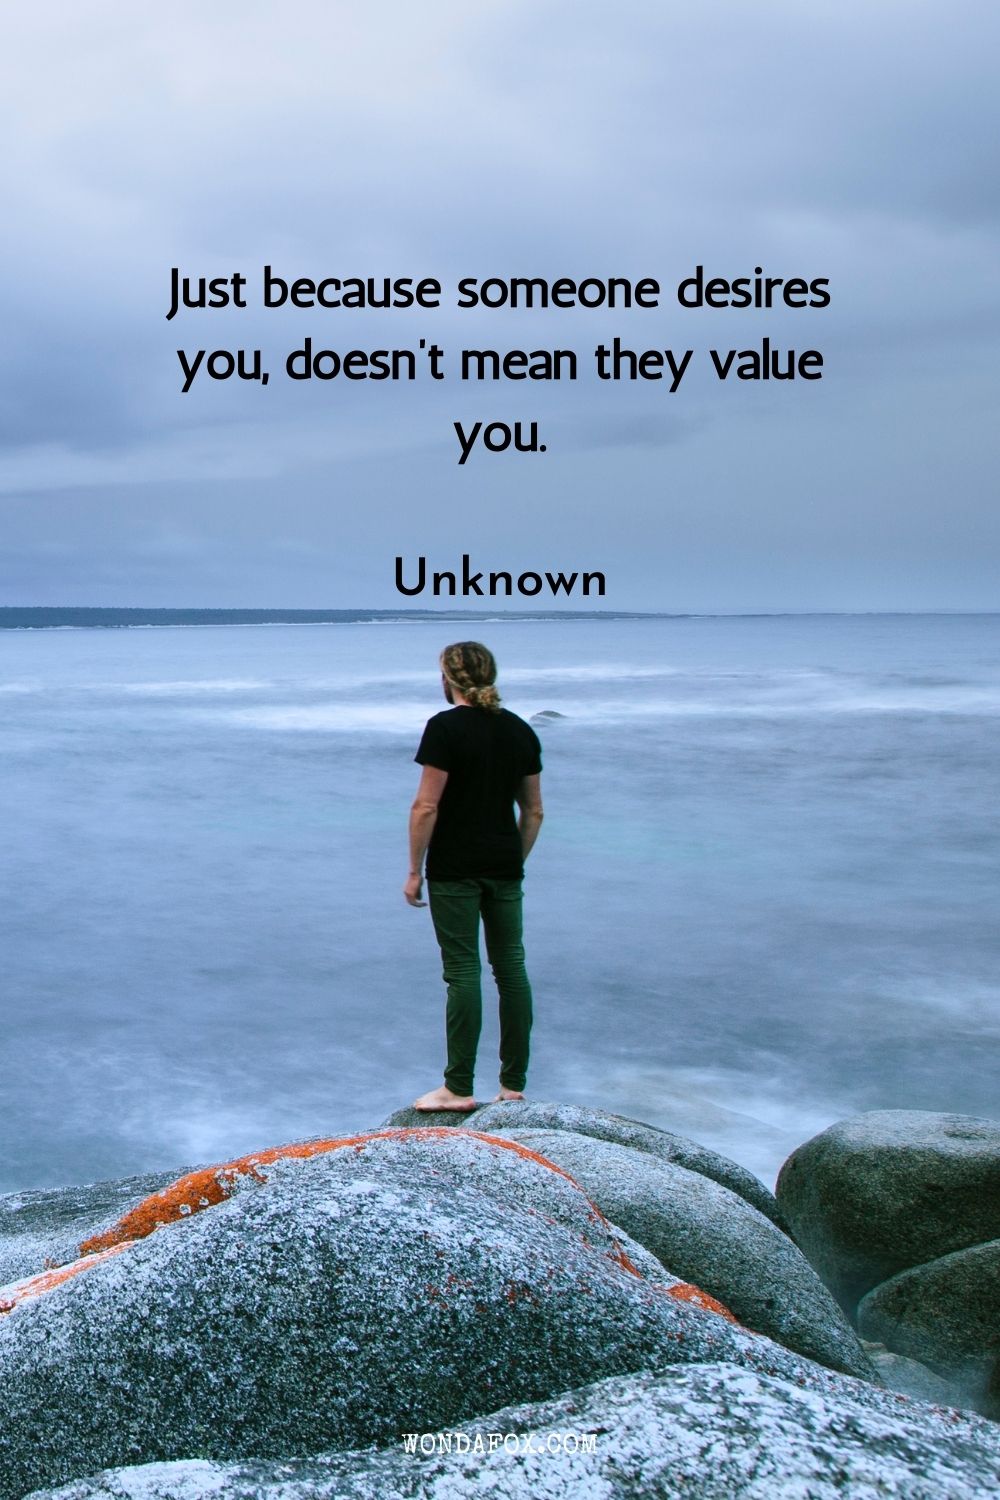 Just because someone desires you, doesn’t mean they value you.